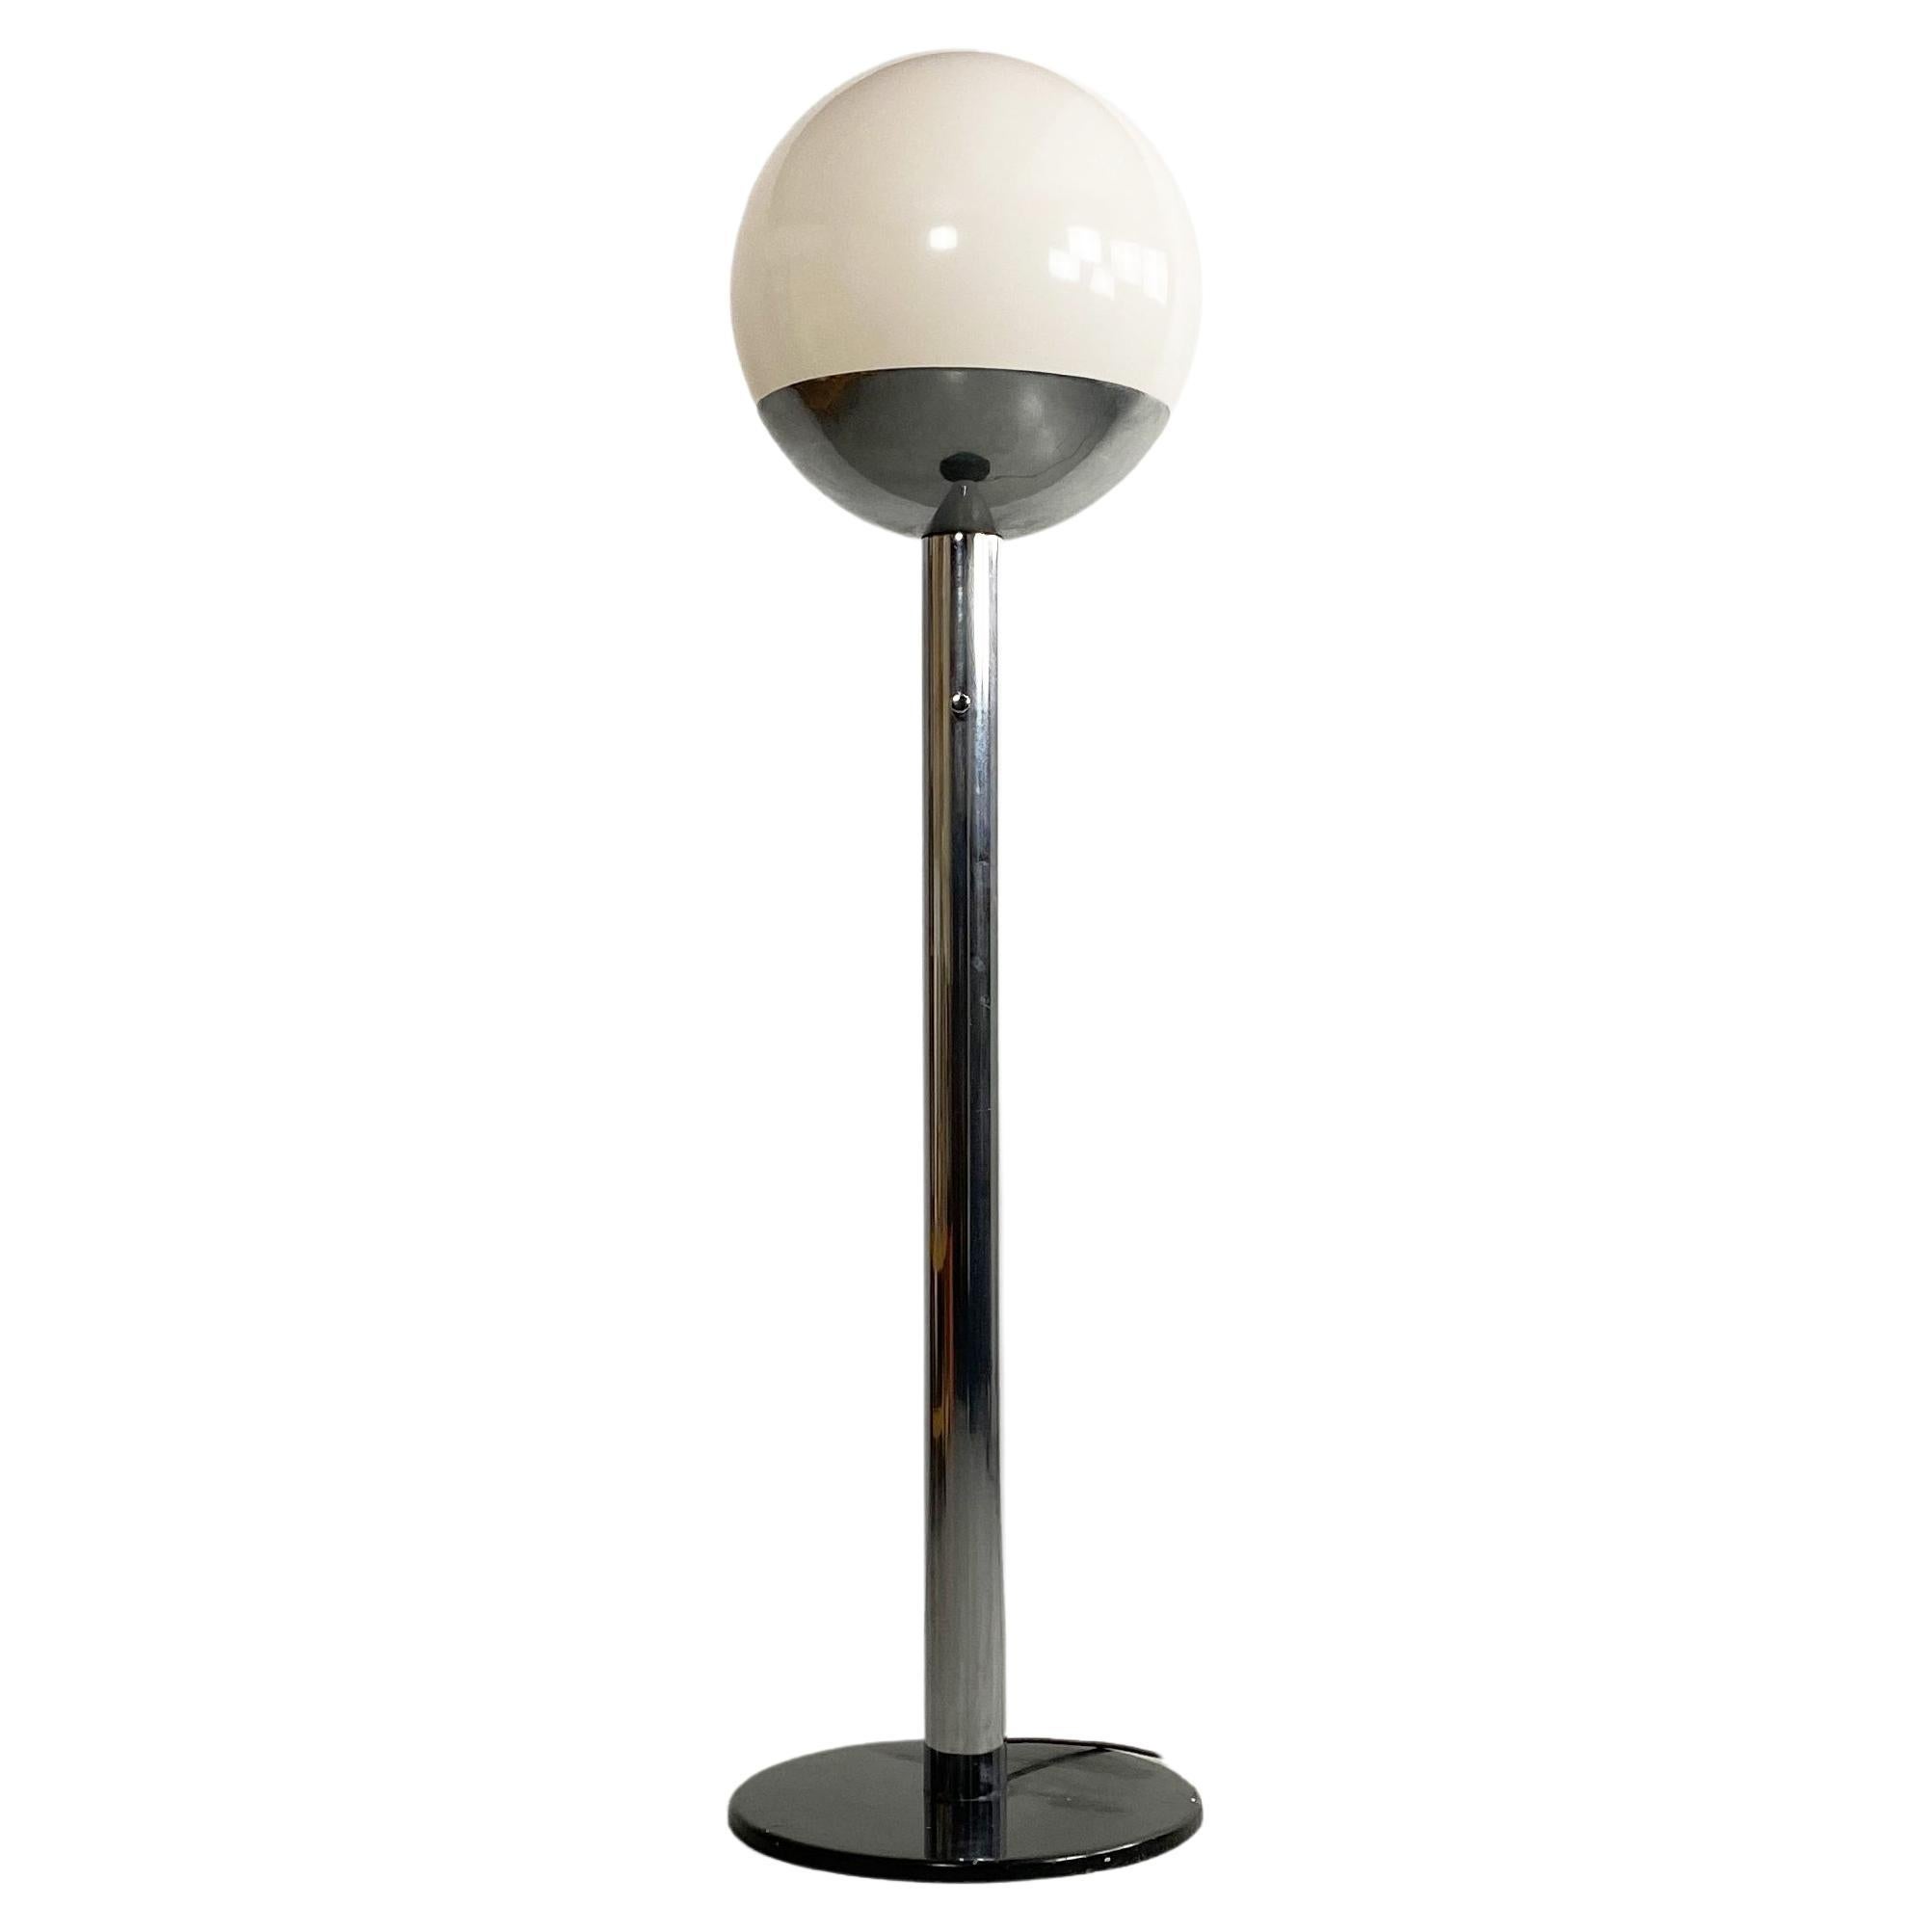 Globe Floor Lamp by Pia Guidetti Crippa for Luci, Italy, c.1970